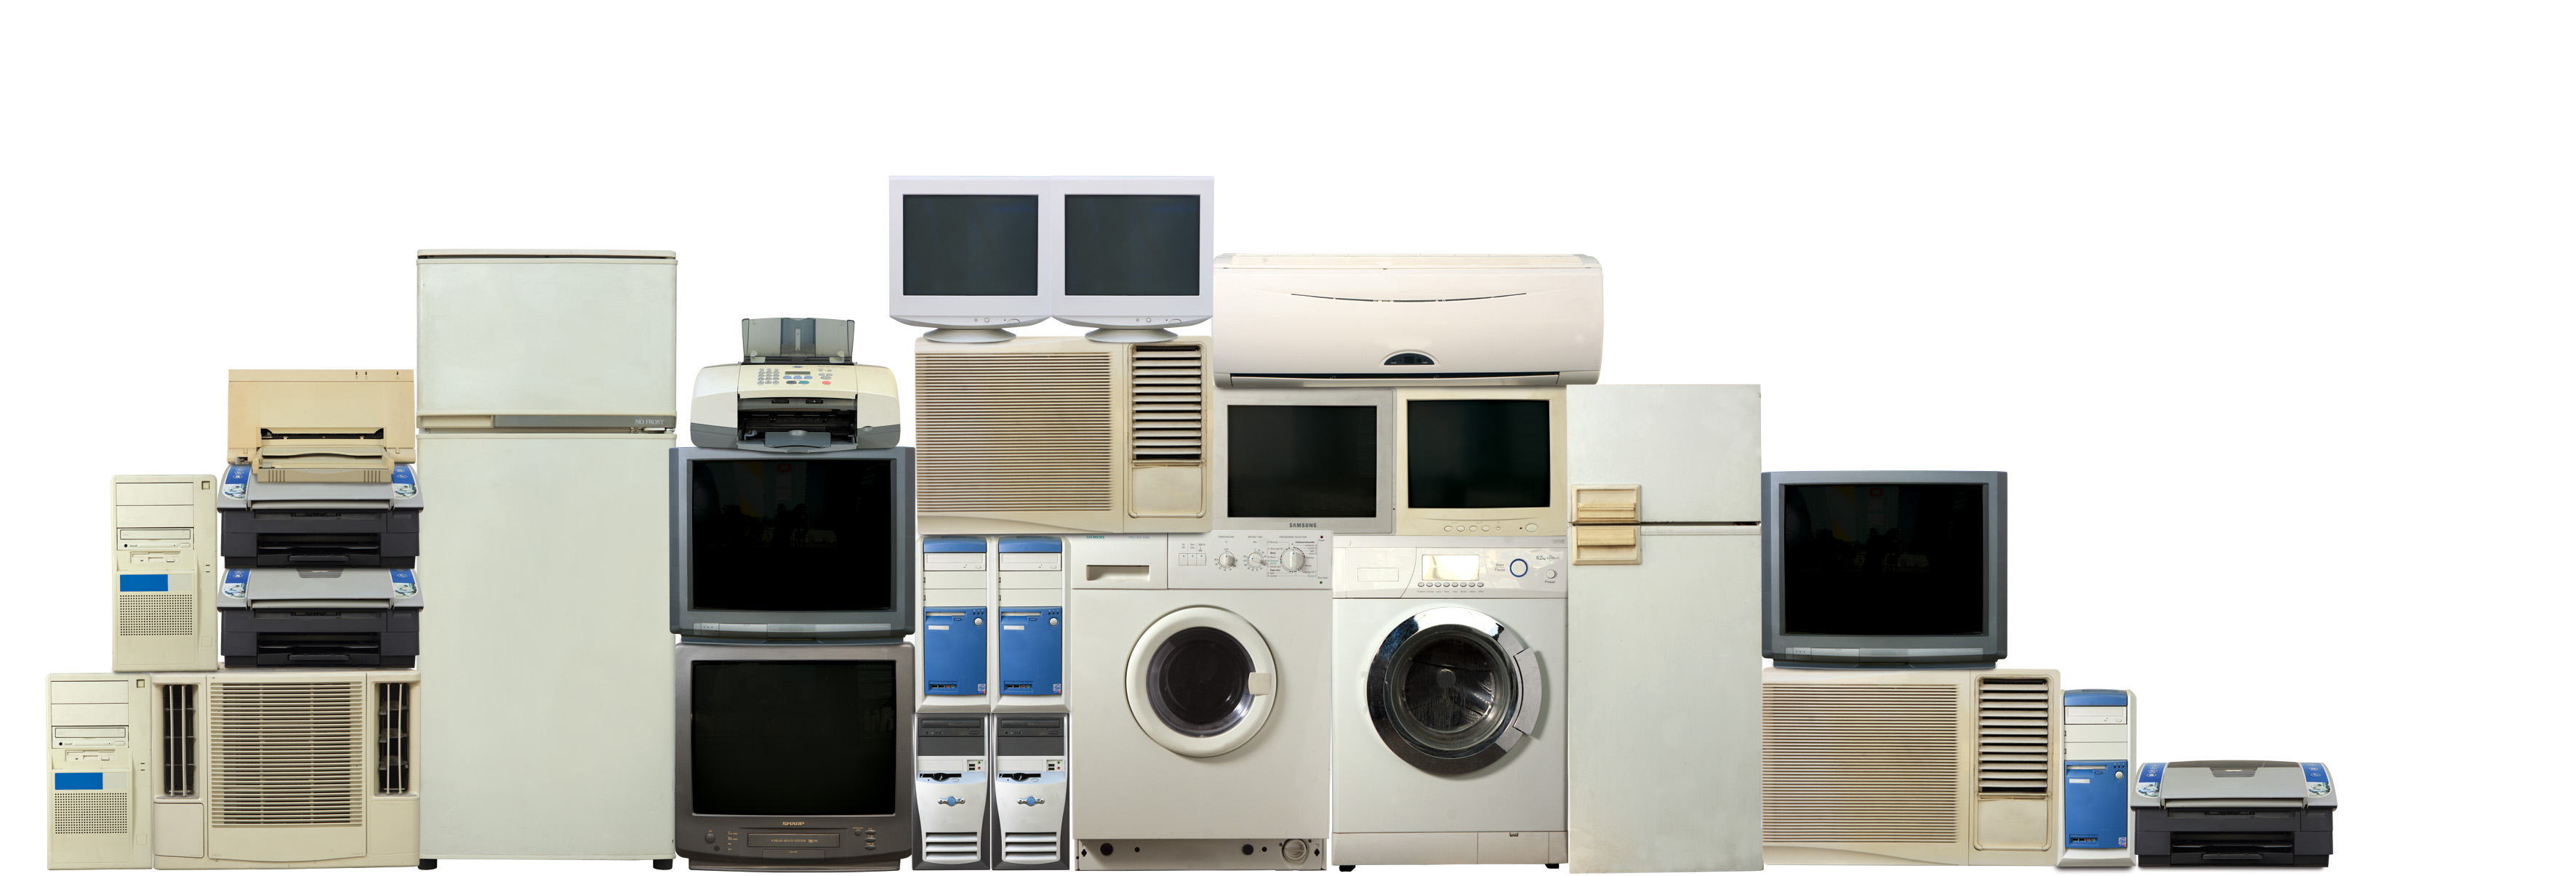 Examples of items included in past E-waste collection programmes